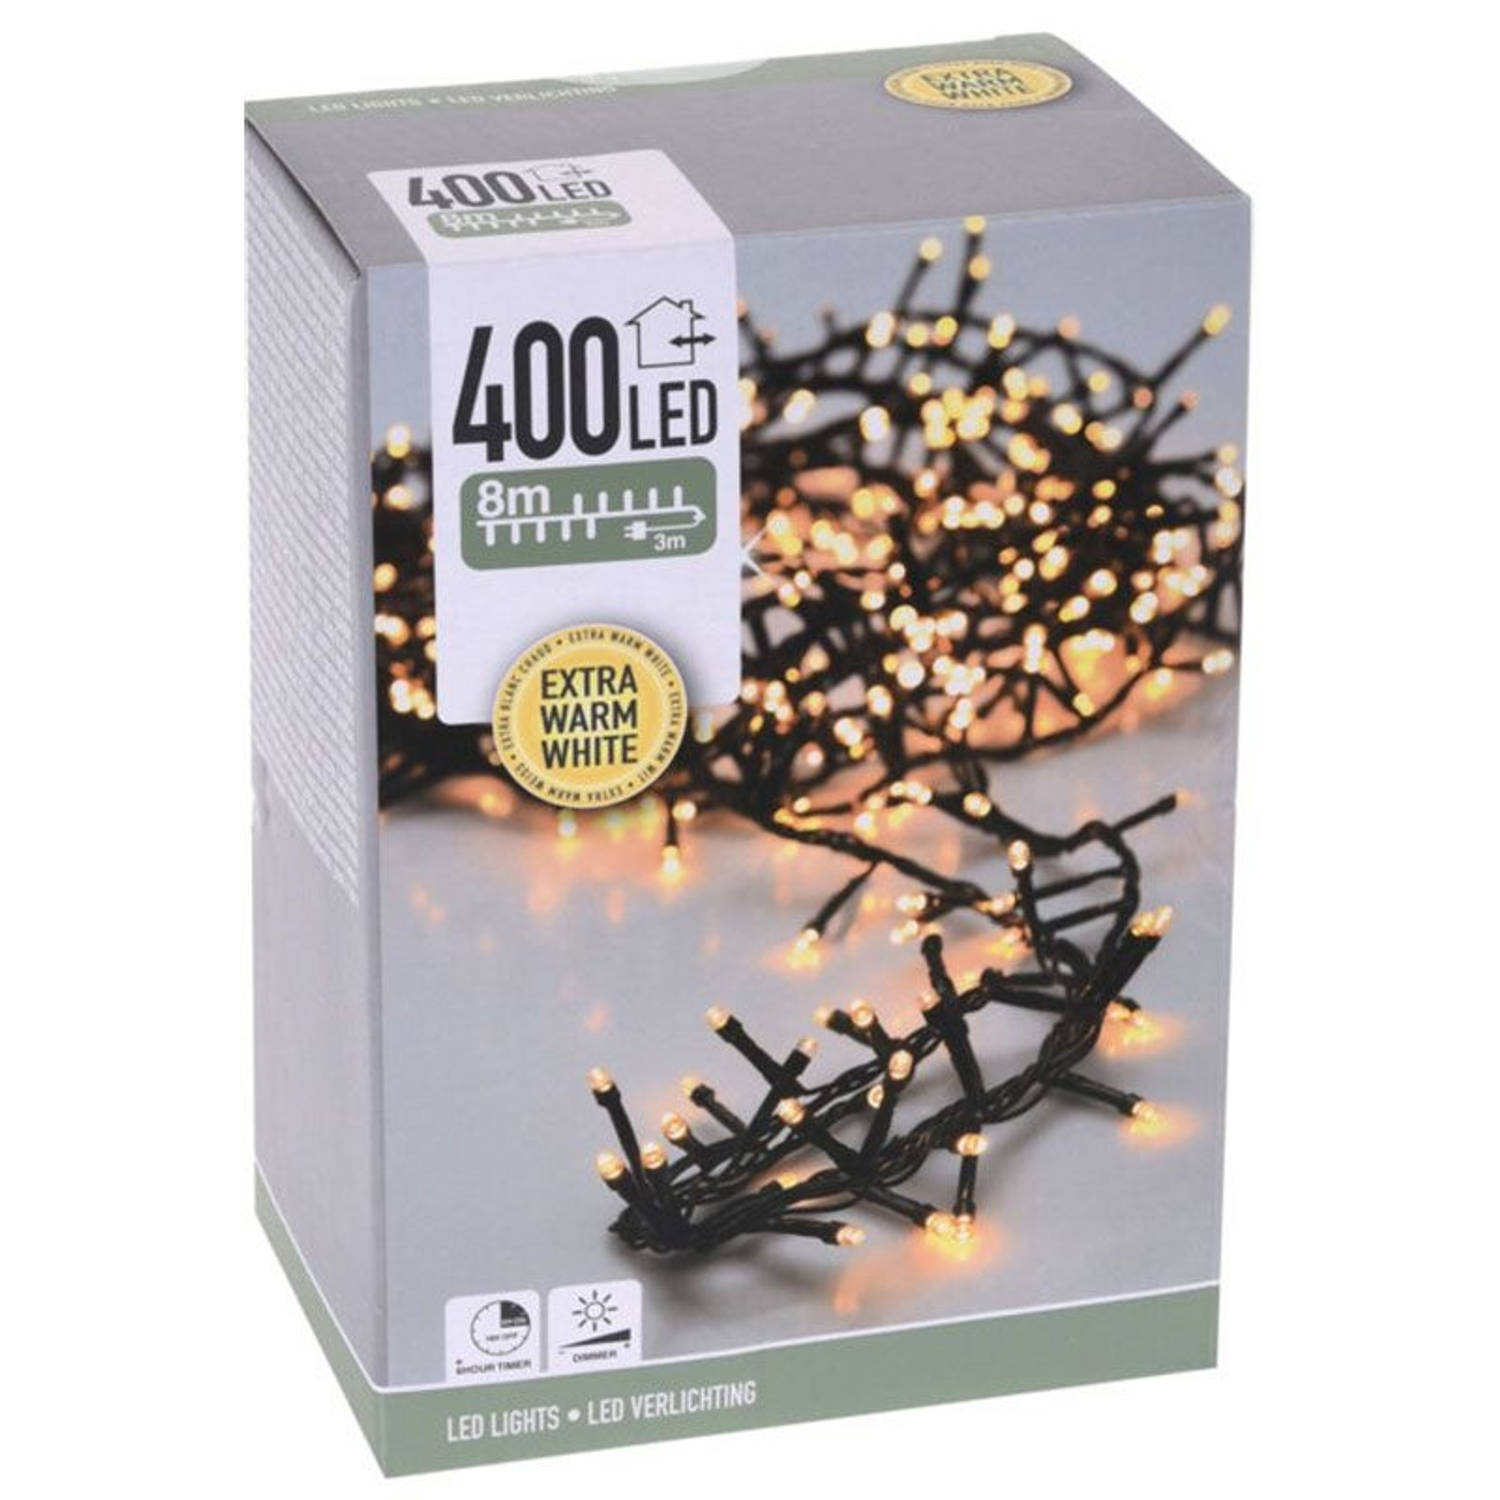 DecorativeLighting Micro Cluster 400 LED - 8m - met timer en dimmer - extra warm wit